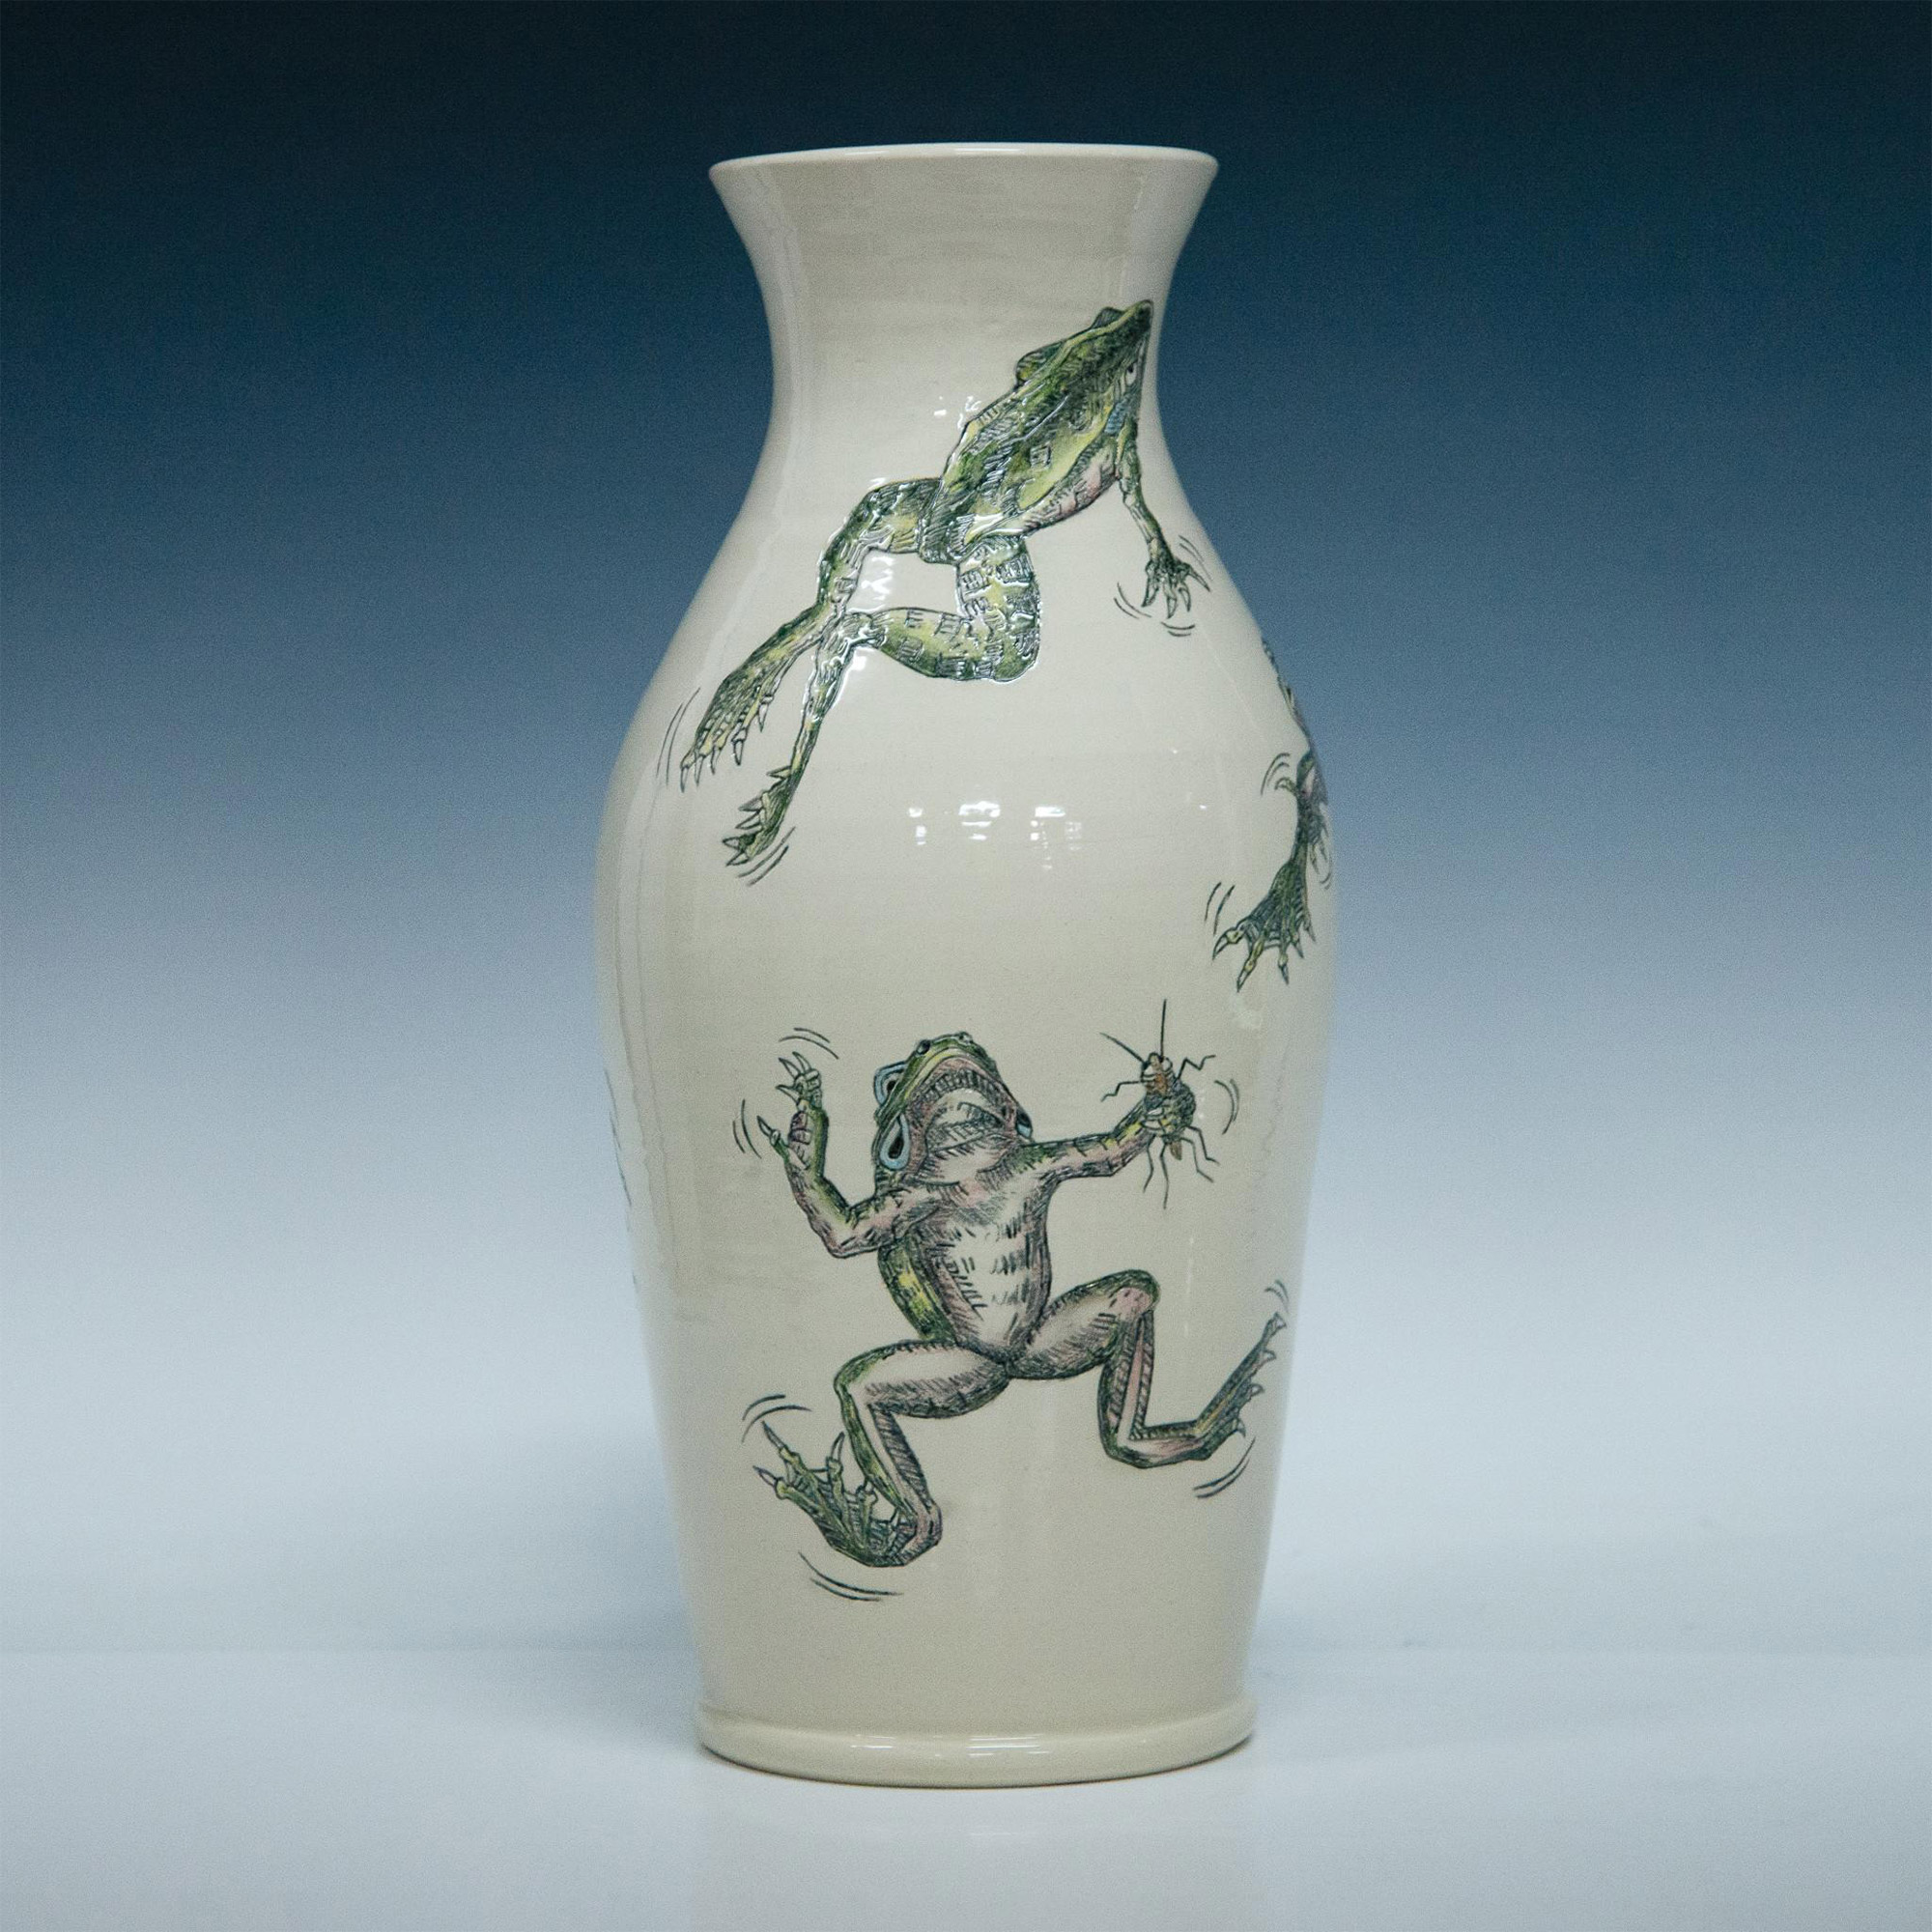 Rare Large Andrew Hull Pottery Trial 1 Vase, Frogs, Signed - Image 2 of 7